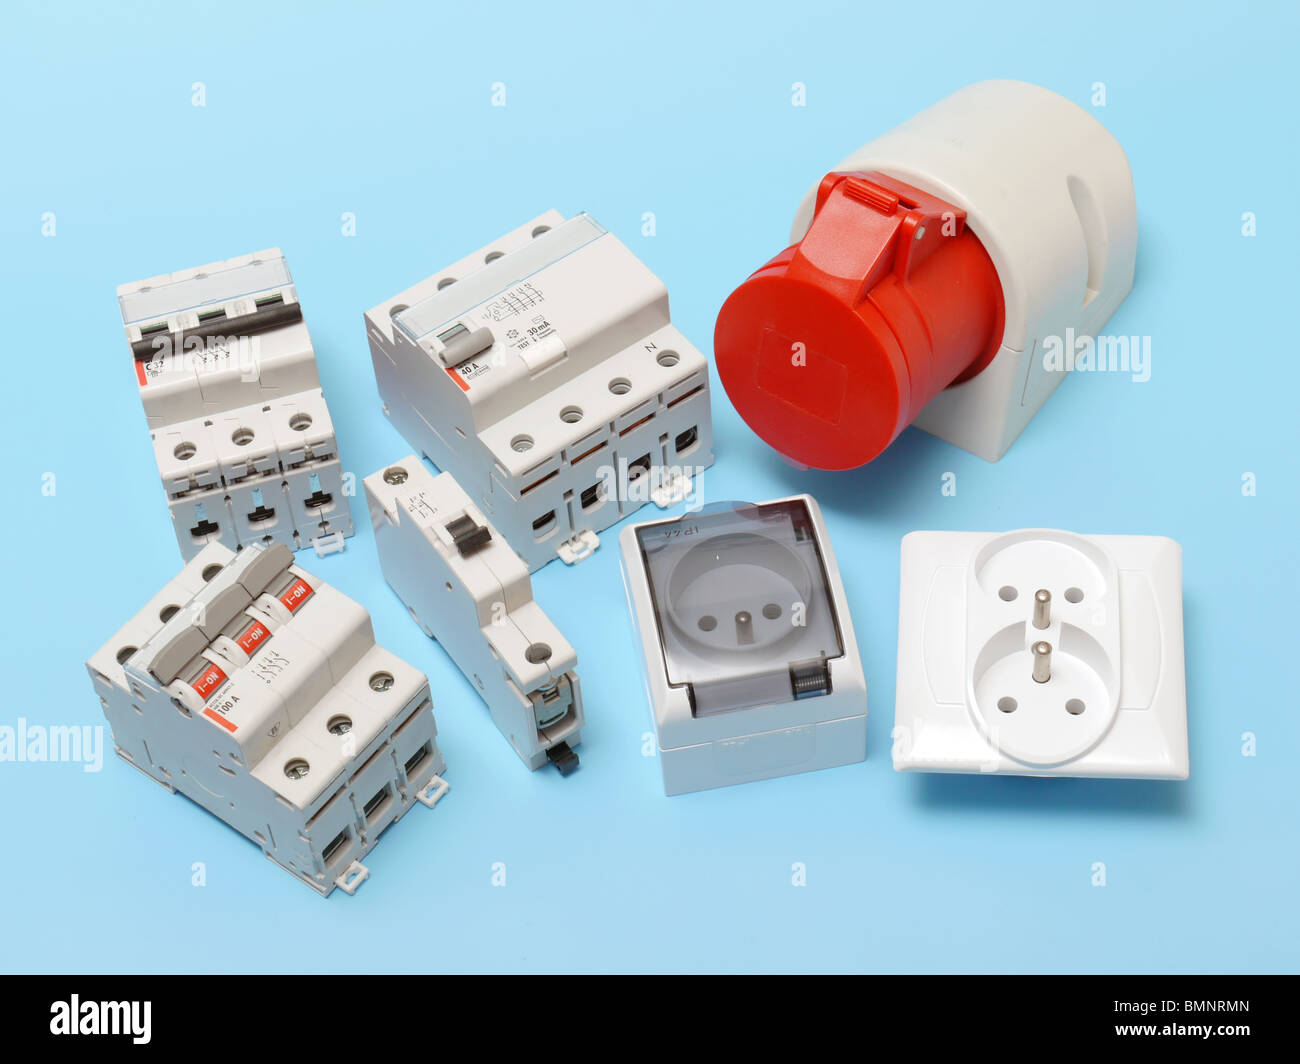 Electrical circuit breakers, main disconnect, power socket and 230 Volt wall sockets shot over blue Stock Photo